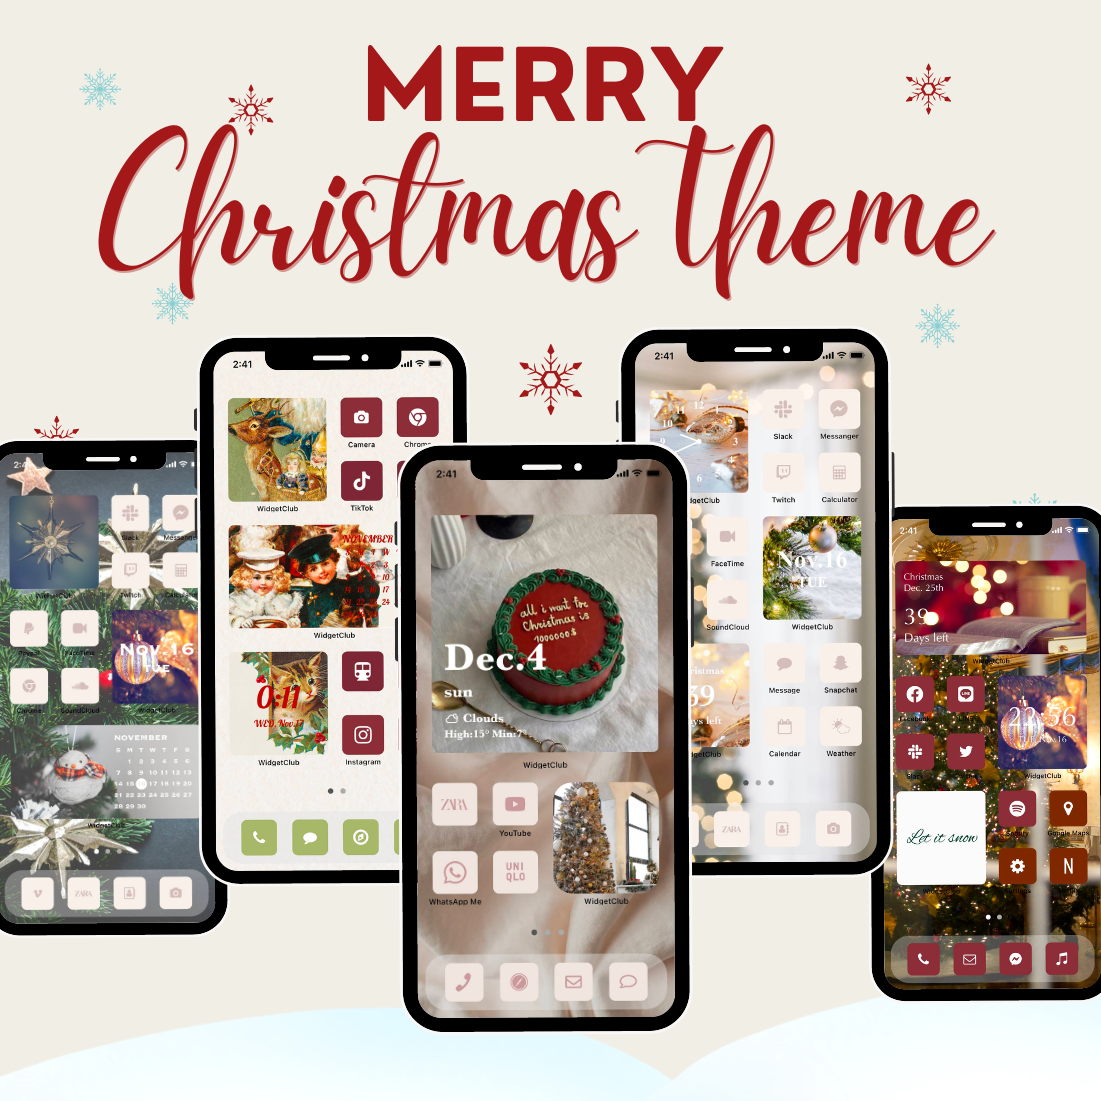 Christmas Valuable theme pack